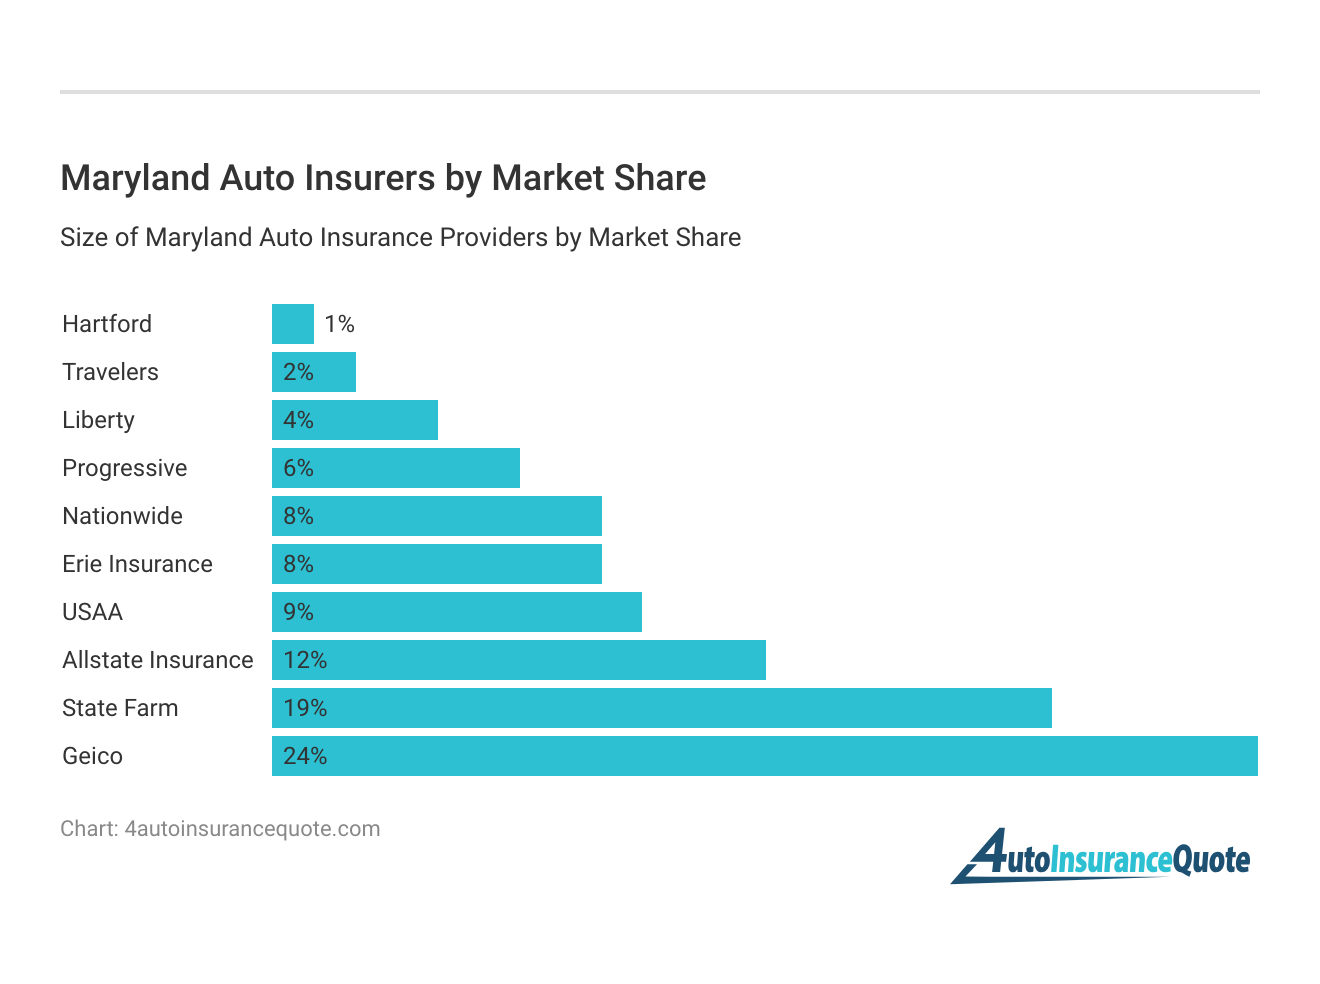 <h3>Maryland Auto Insurers by Market Share</h3>